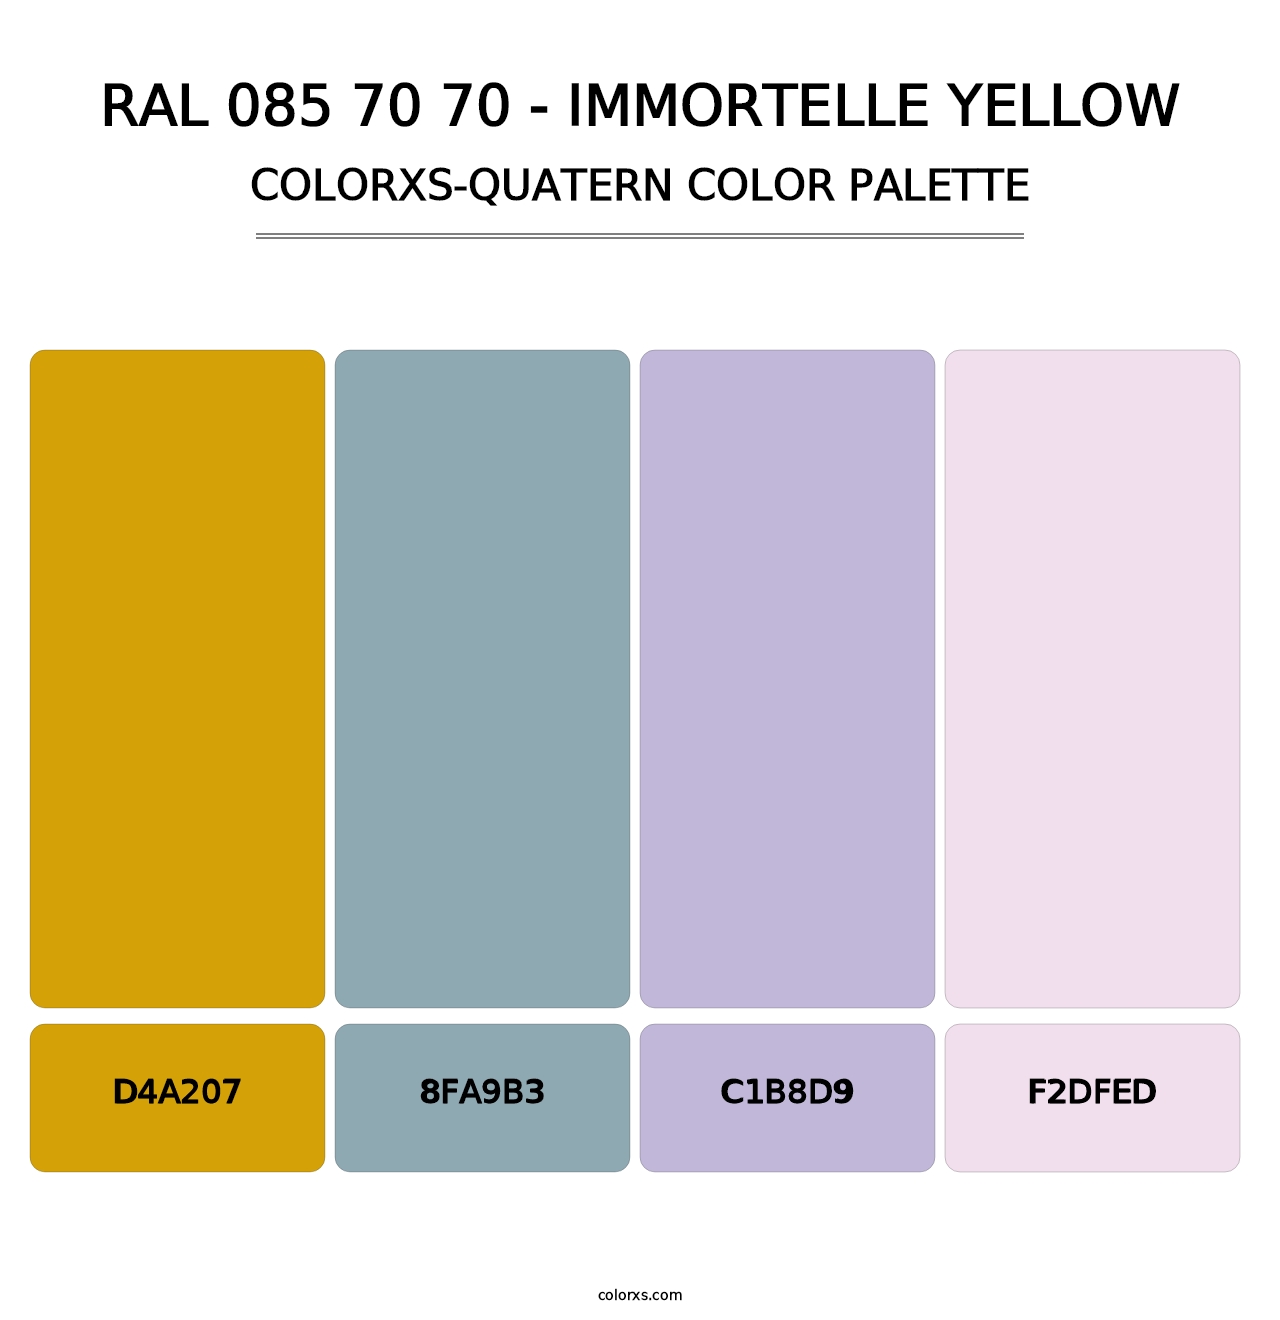 RAL 085 70 70 - Immortelle Yellow - Colorxs Quatern Palette